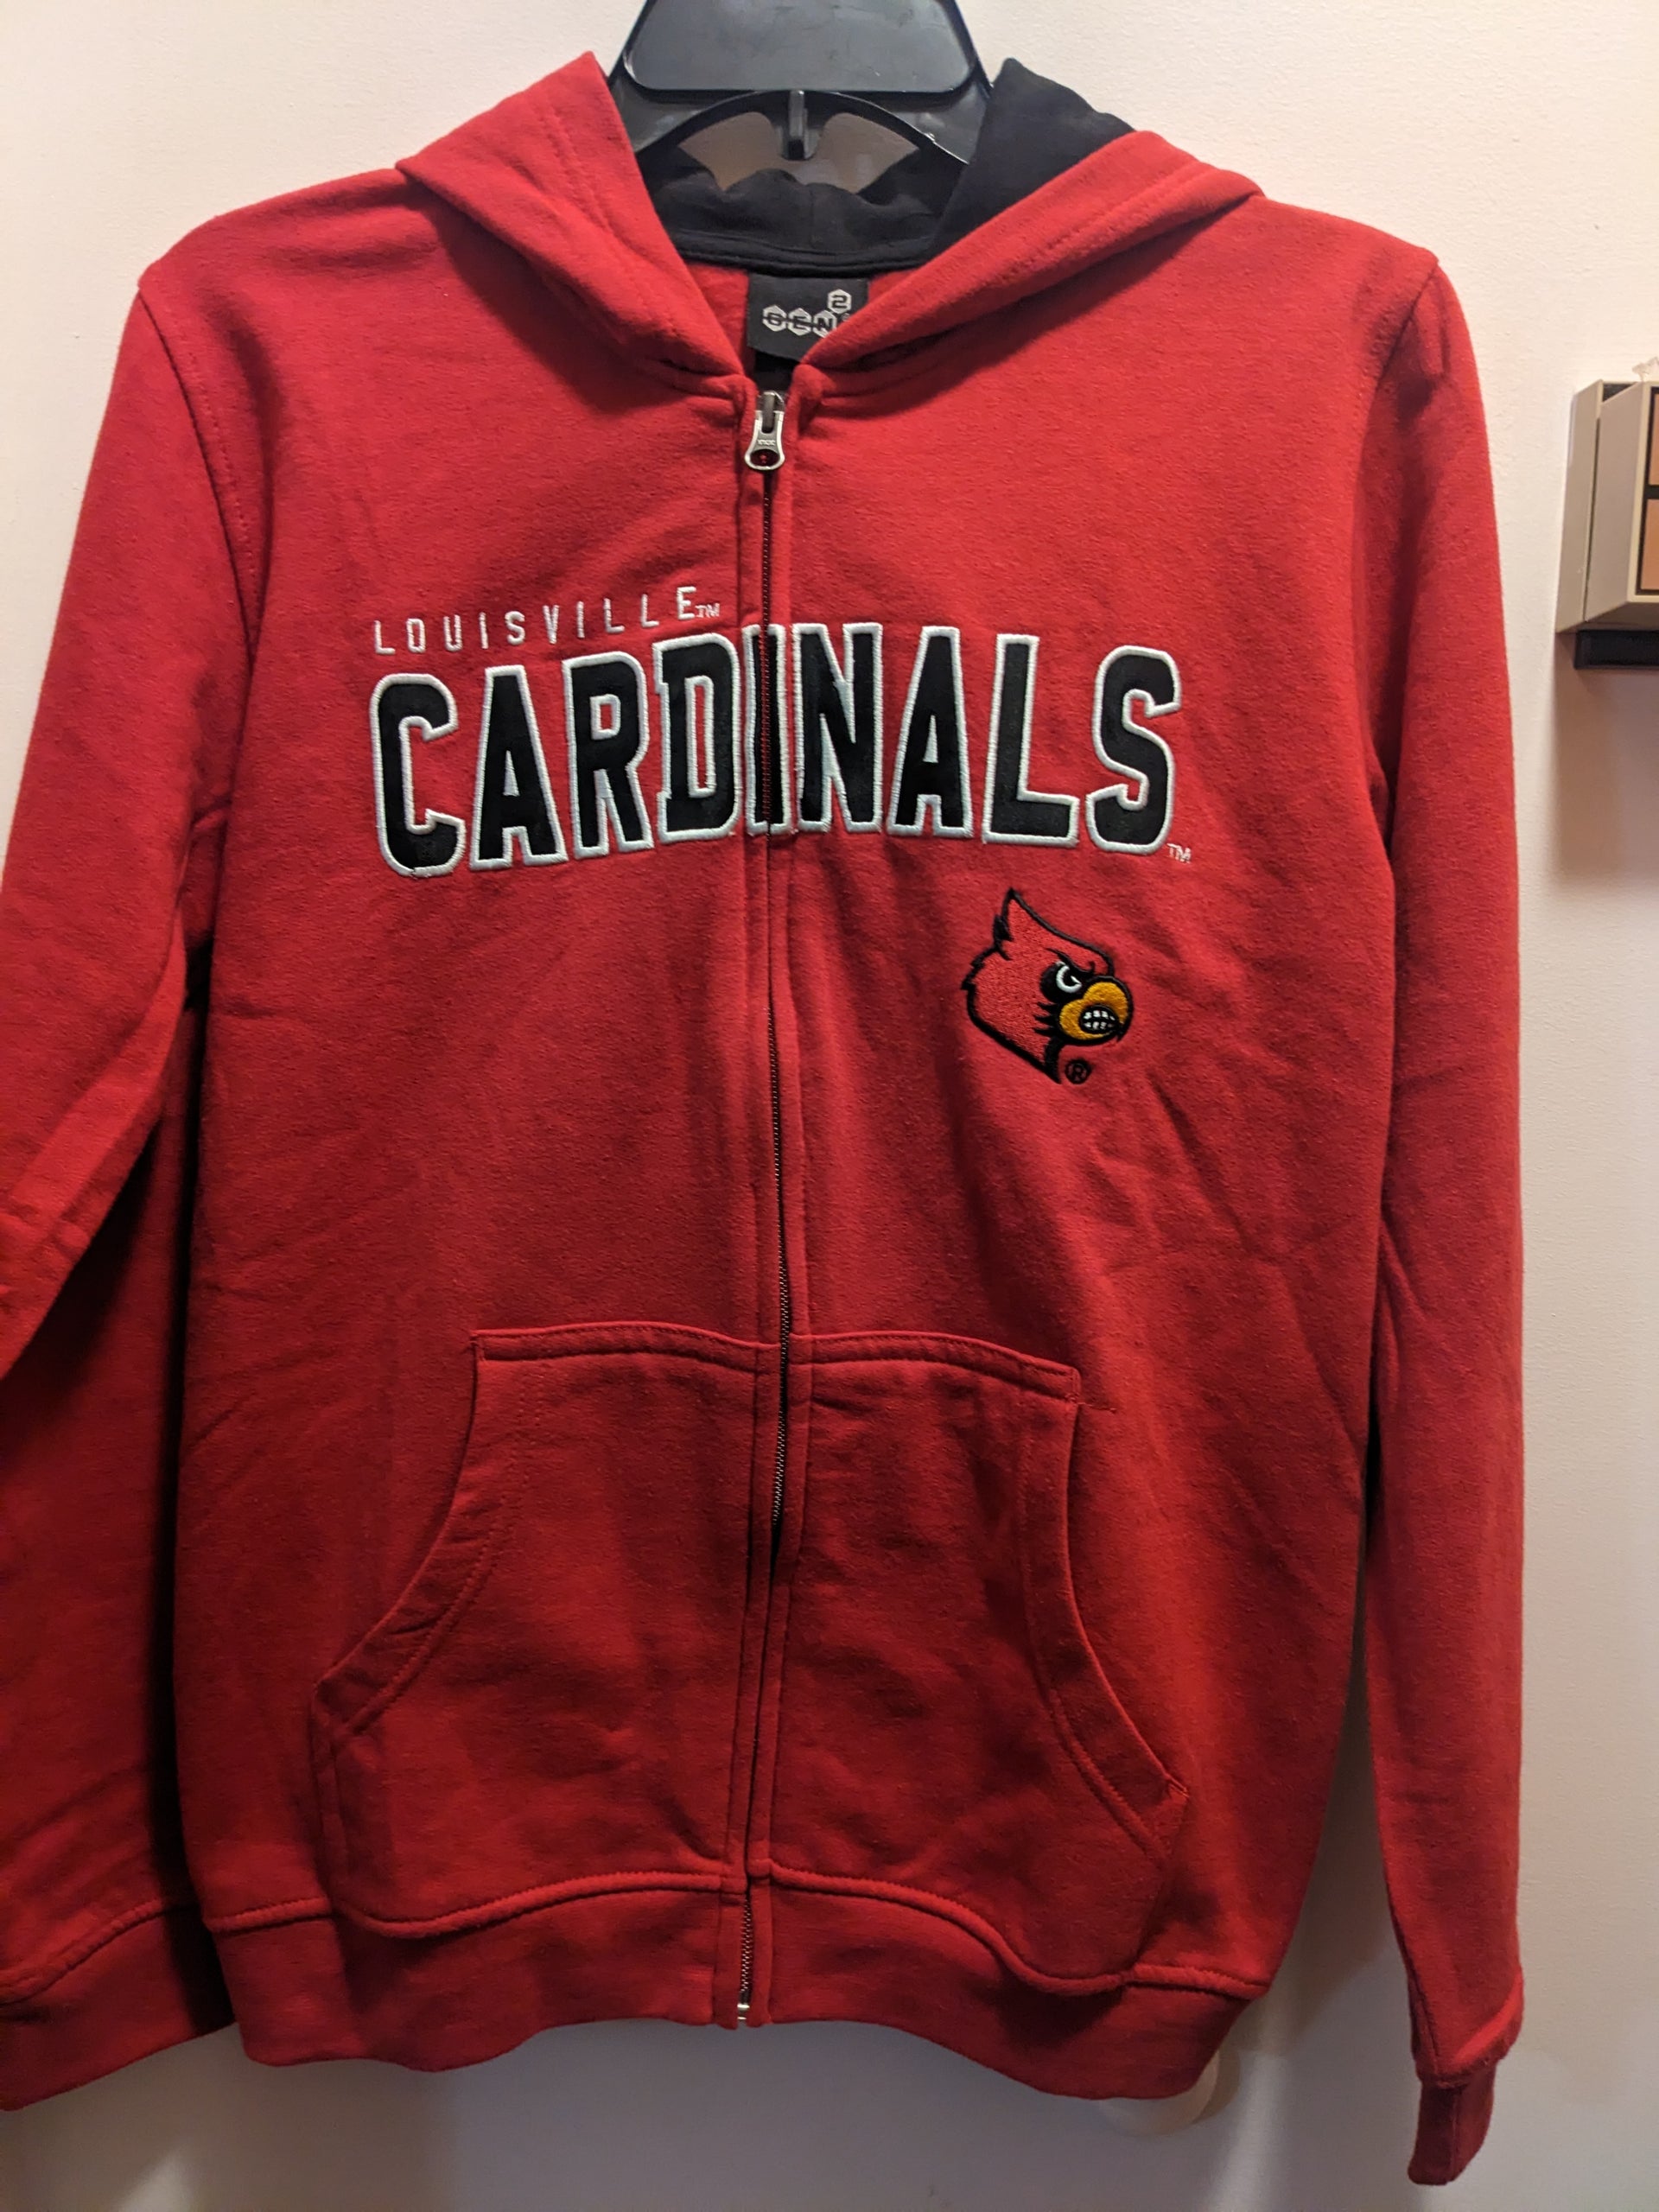 New Louisville Cardinals Youth size Large (L 14/16) Gray Hoodie by J.America